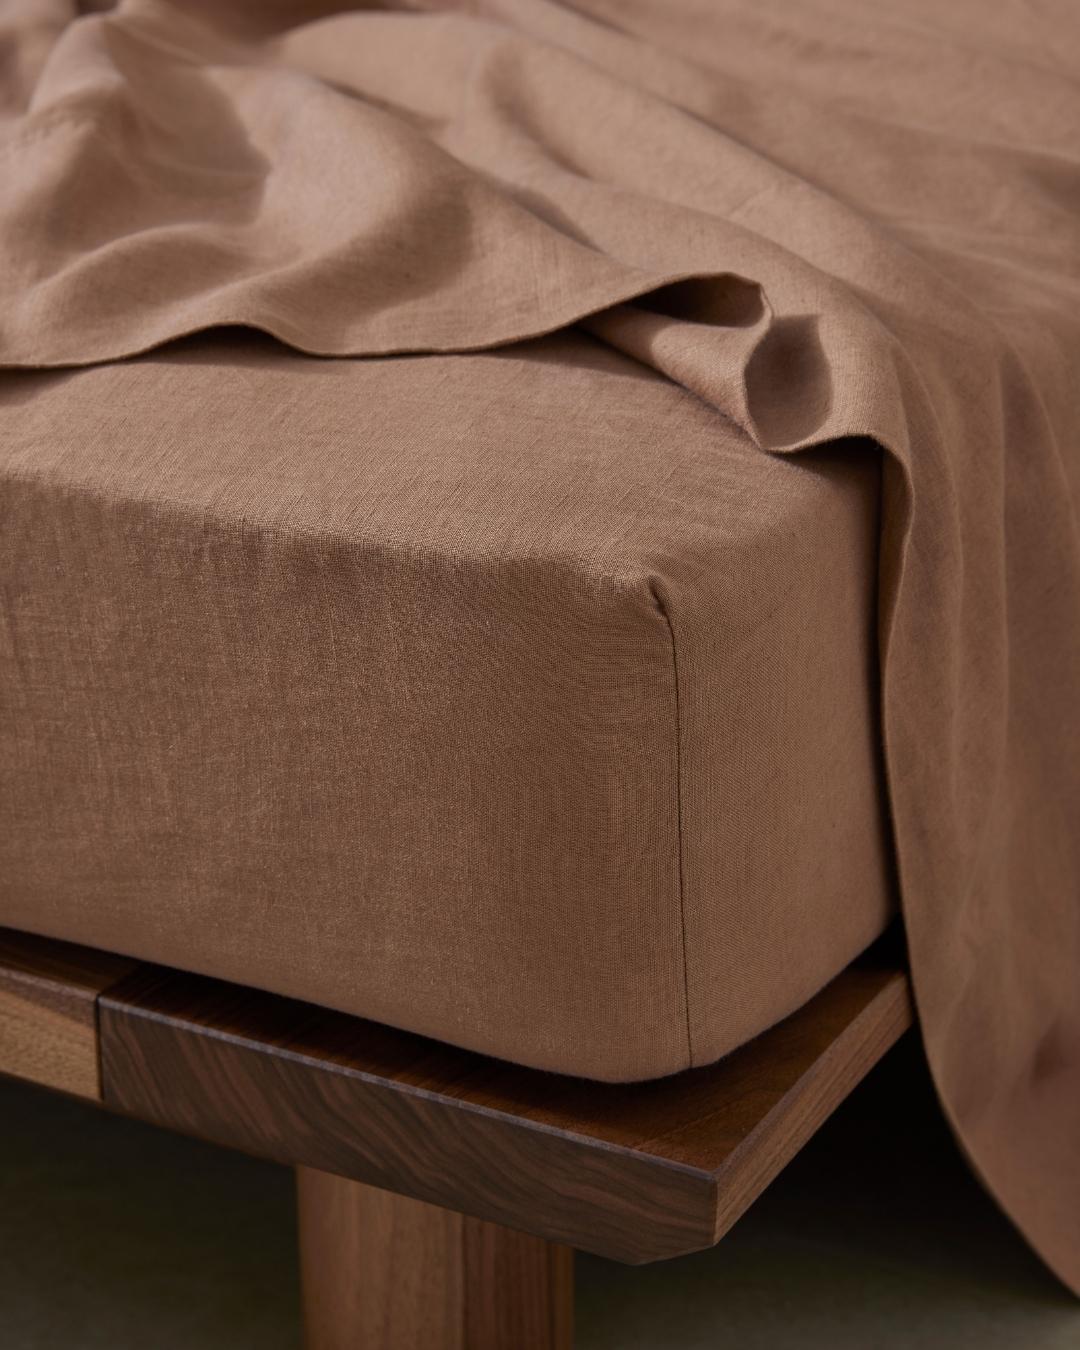 Cover your mattress with soft, luxurious linen with the Ravello Fitted Sheet. The Biscuit colourway is a beautiful, earthy clay that offers warmth and is bound to softly brighten your bedroom while bringing a warm, cosy feel.